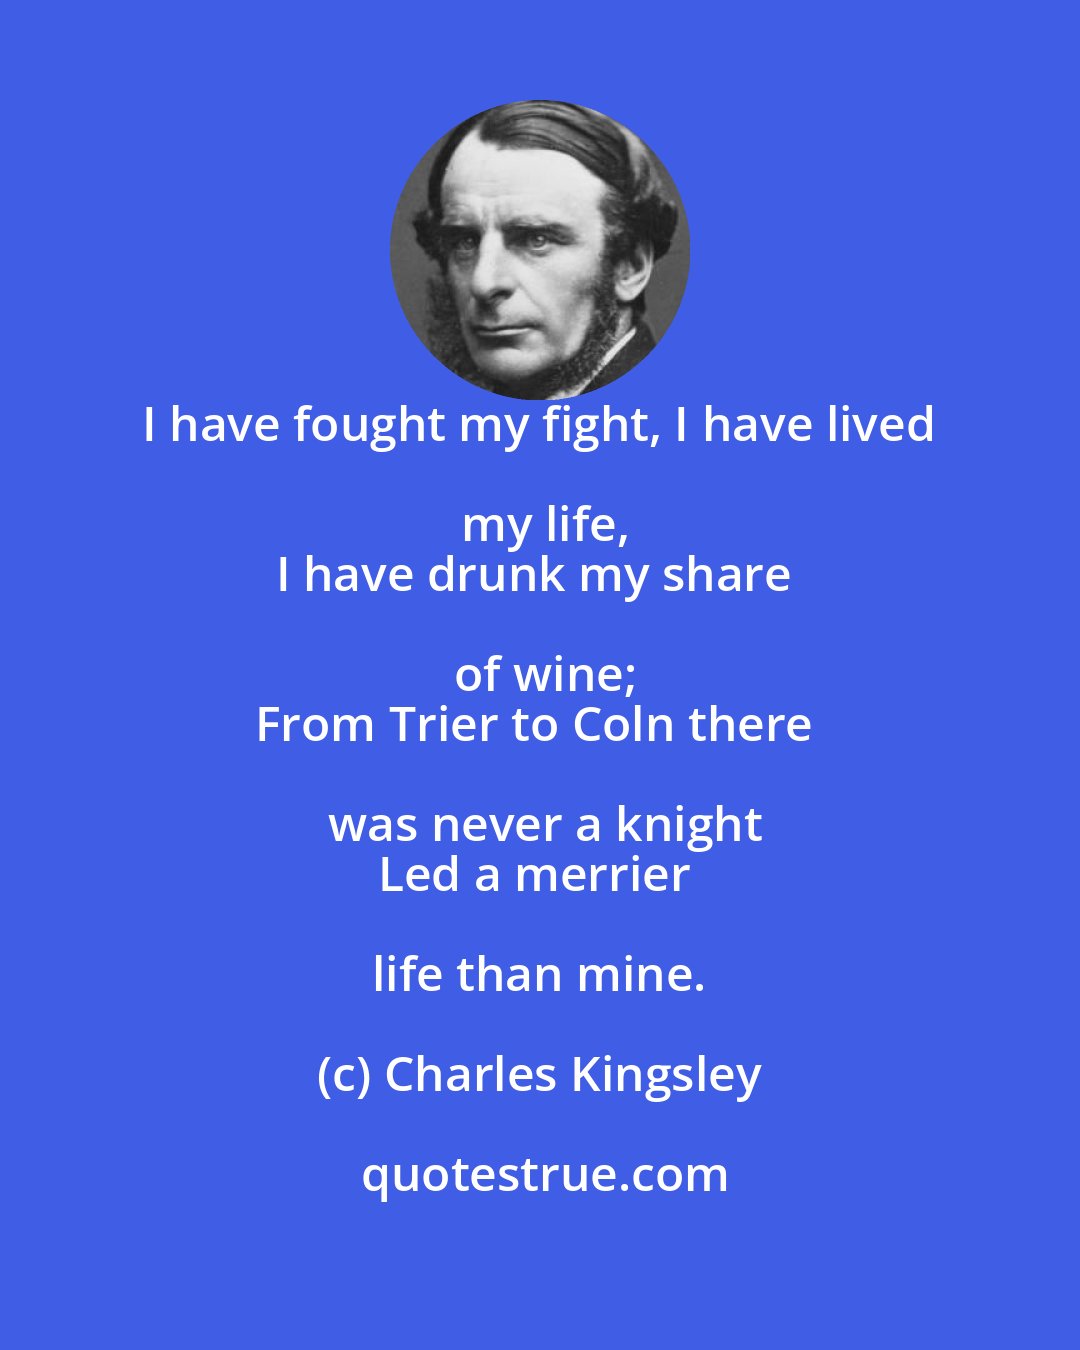 Charles Kingsley: I have fought my fight, I have lived my life,
I have drunk my share of wine;
From Trier to Coln there was never a knight
Led a merrier life than mine.